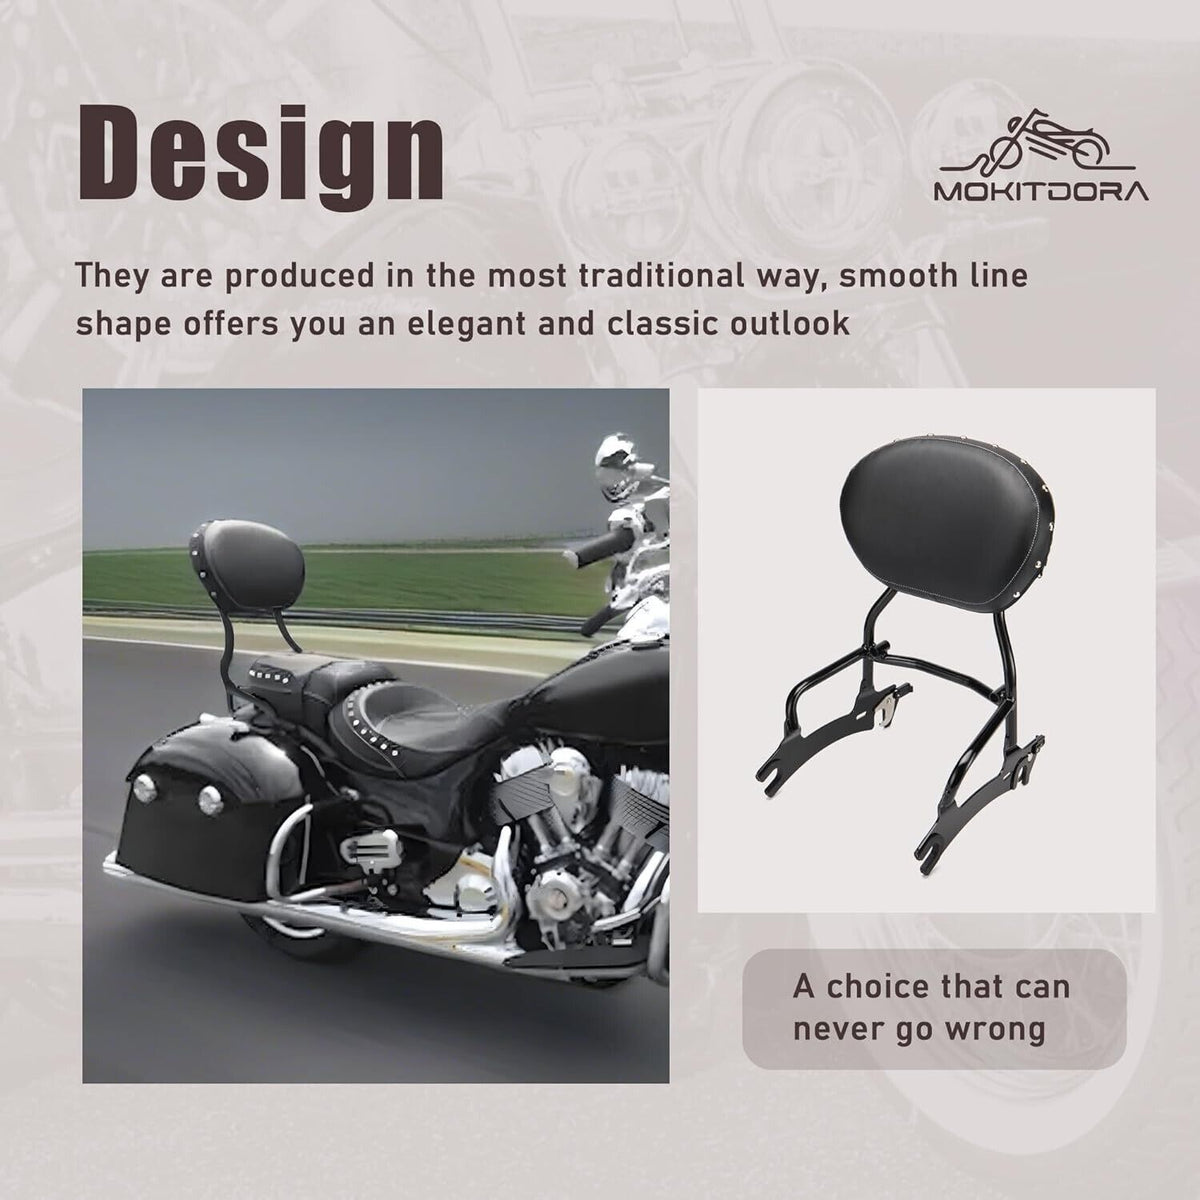 MoKitDora 12&quot; Detachable Indian Sissy Bar Passenger Backrest Upright with Pad for 2014-2018 Indian Chief Dark Horse Indian Chief Vintage Classic, Black